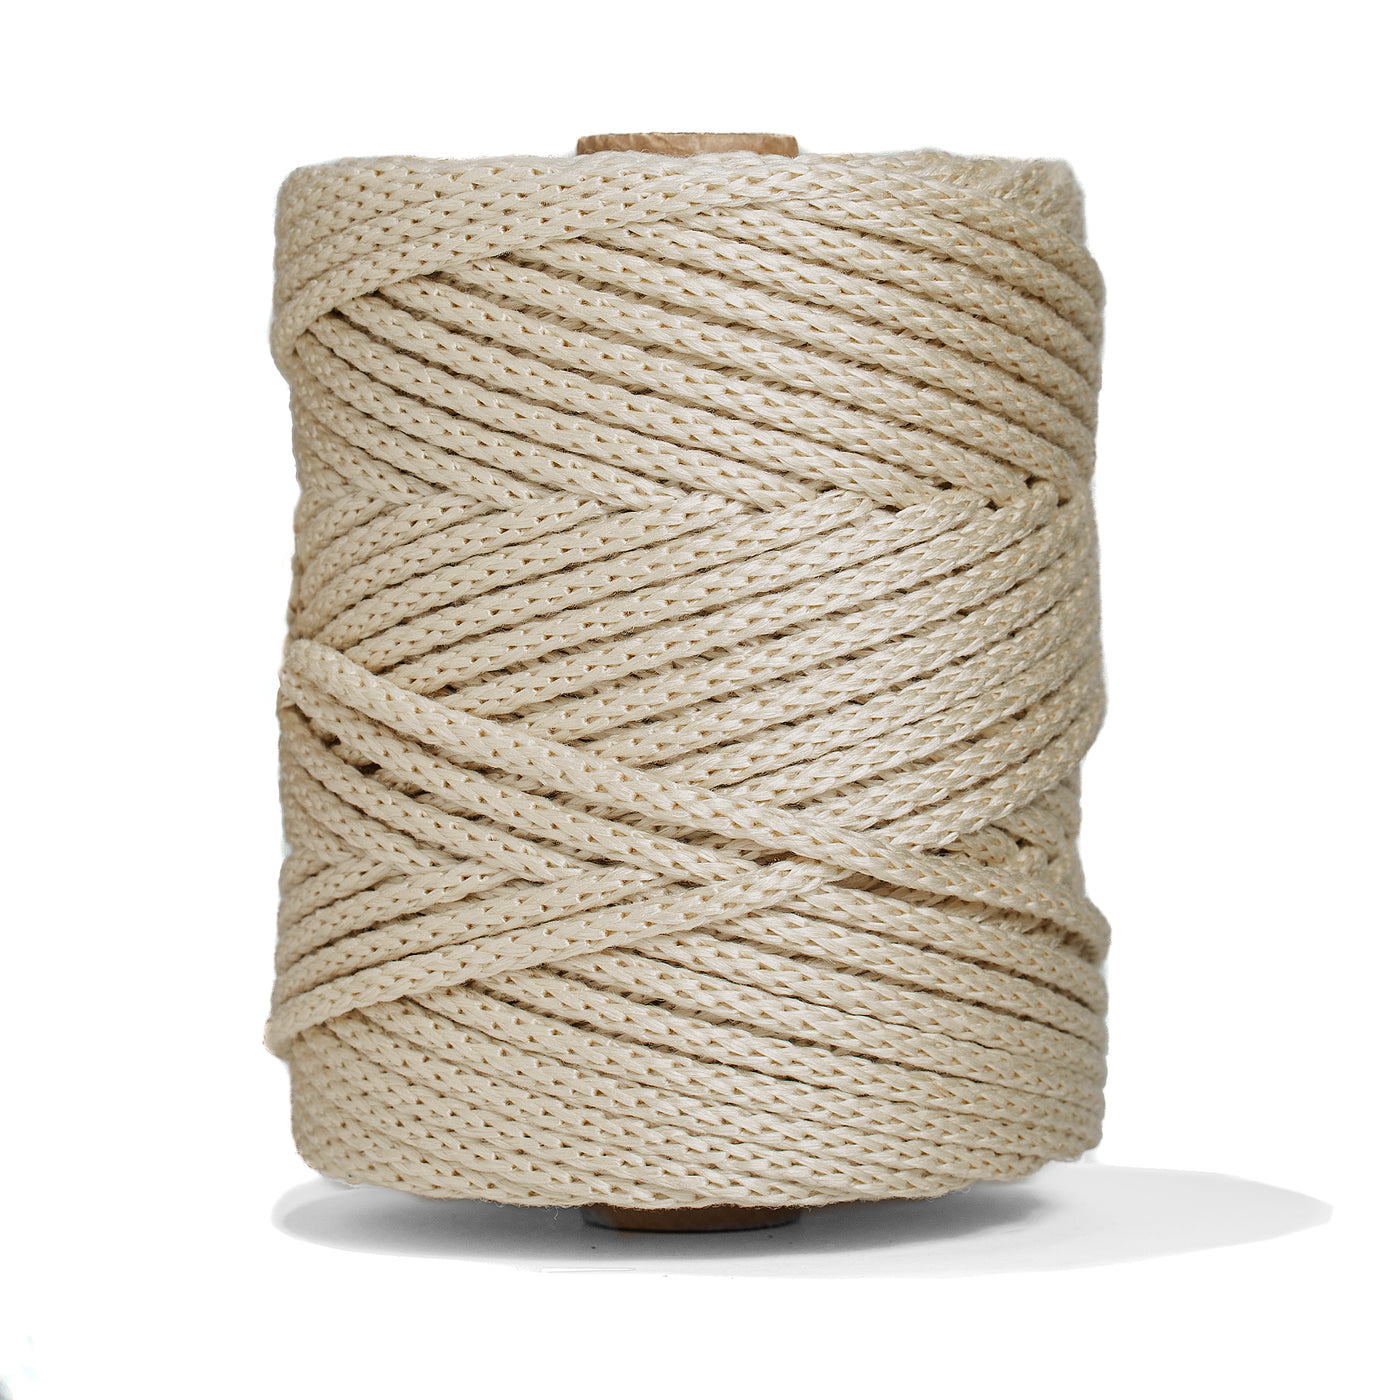 OUTDOOR RECYCLED BRAIDED CORD 6 MM - NATURAL COLOR